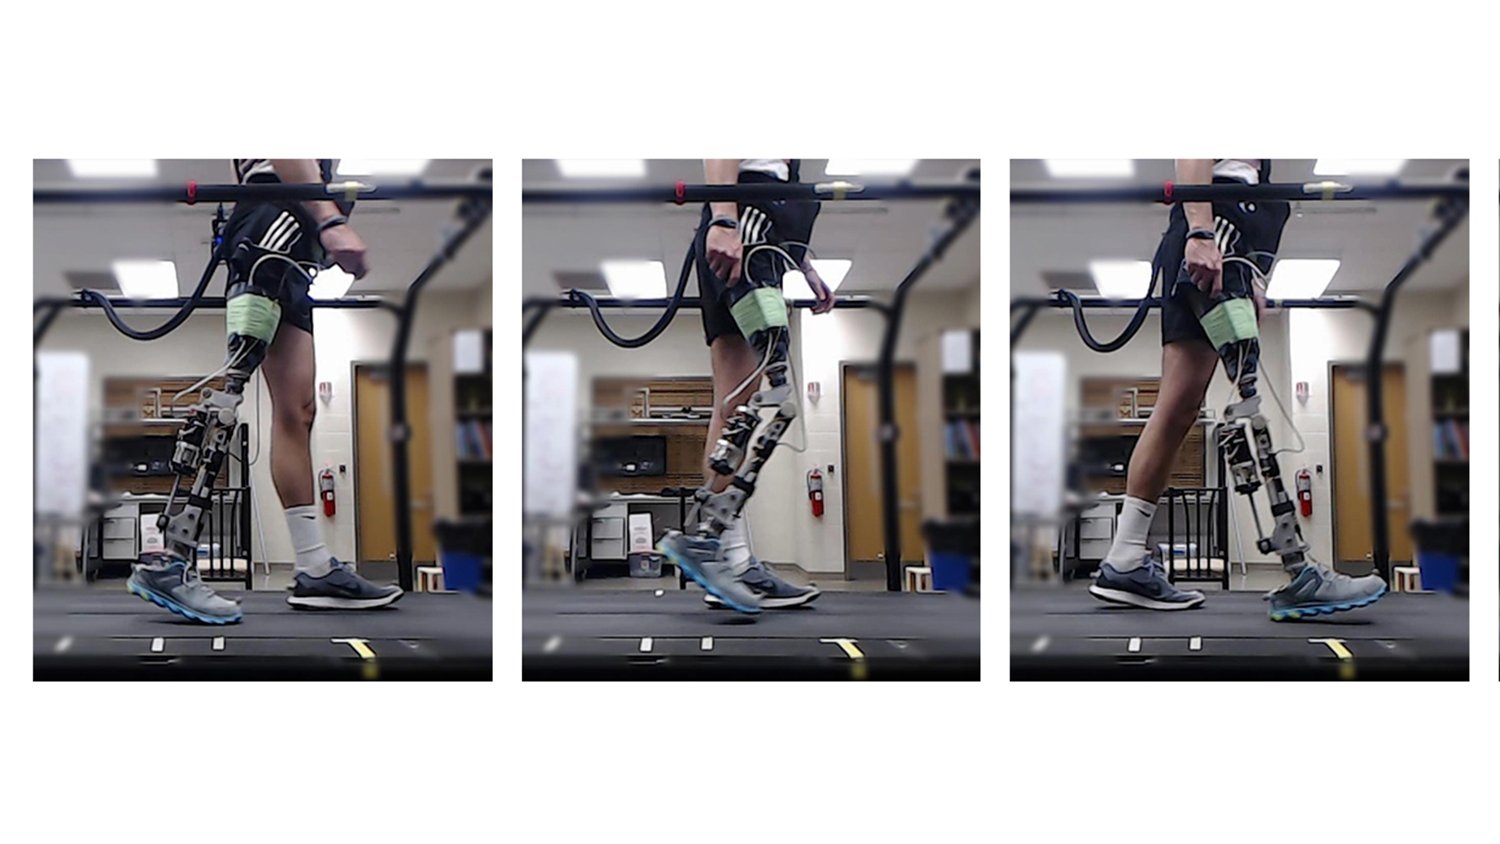 person with prosthetic leg walking on treadmill